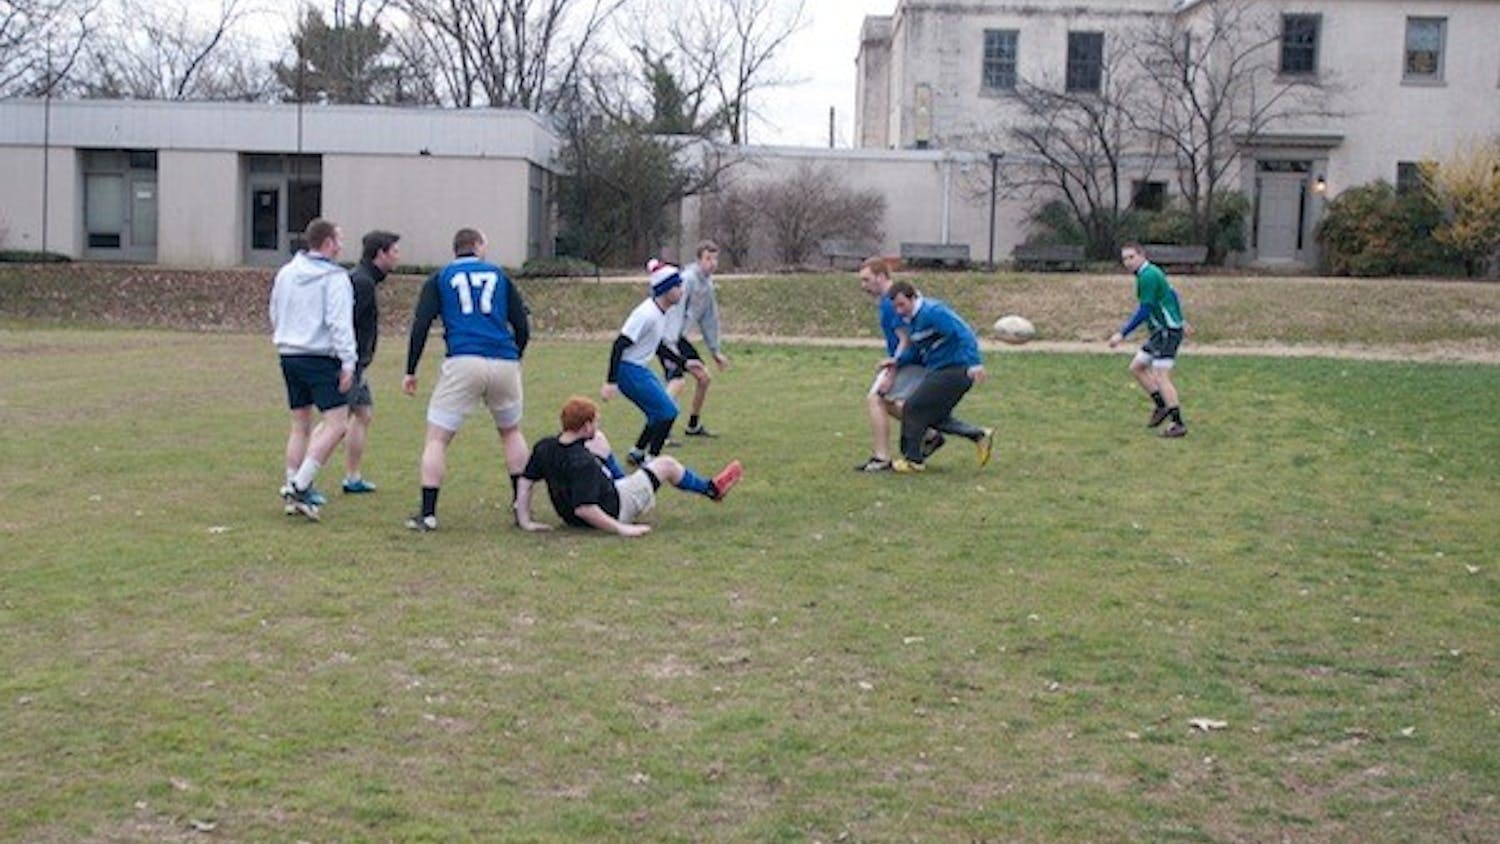 AU students playing rugby on Tenley Campus.